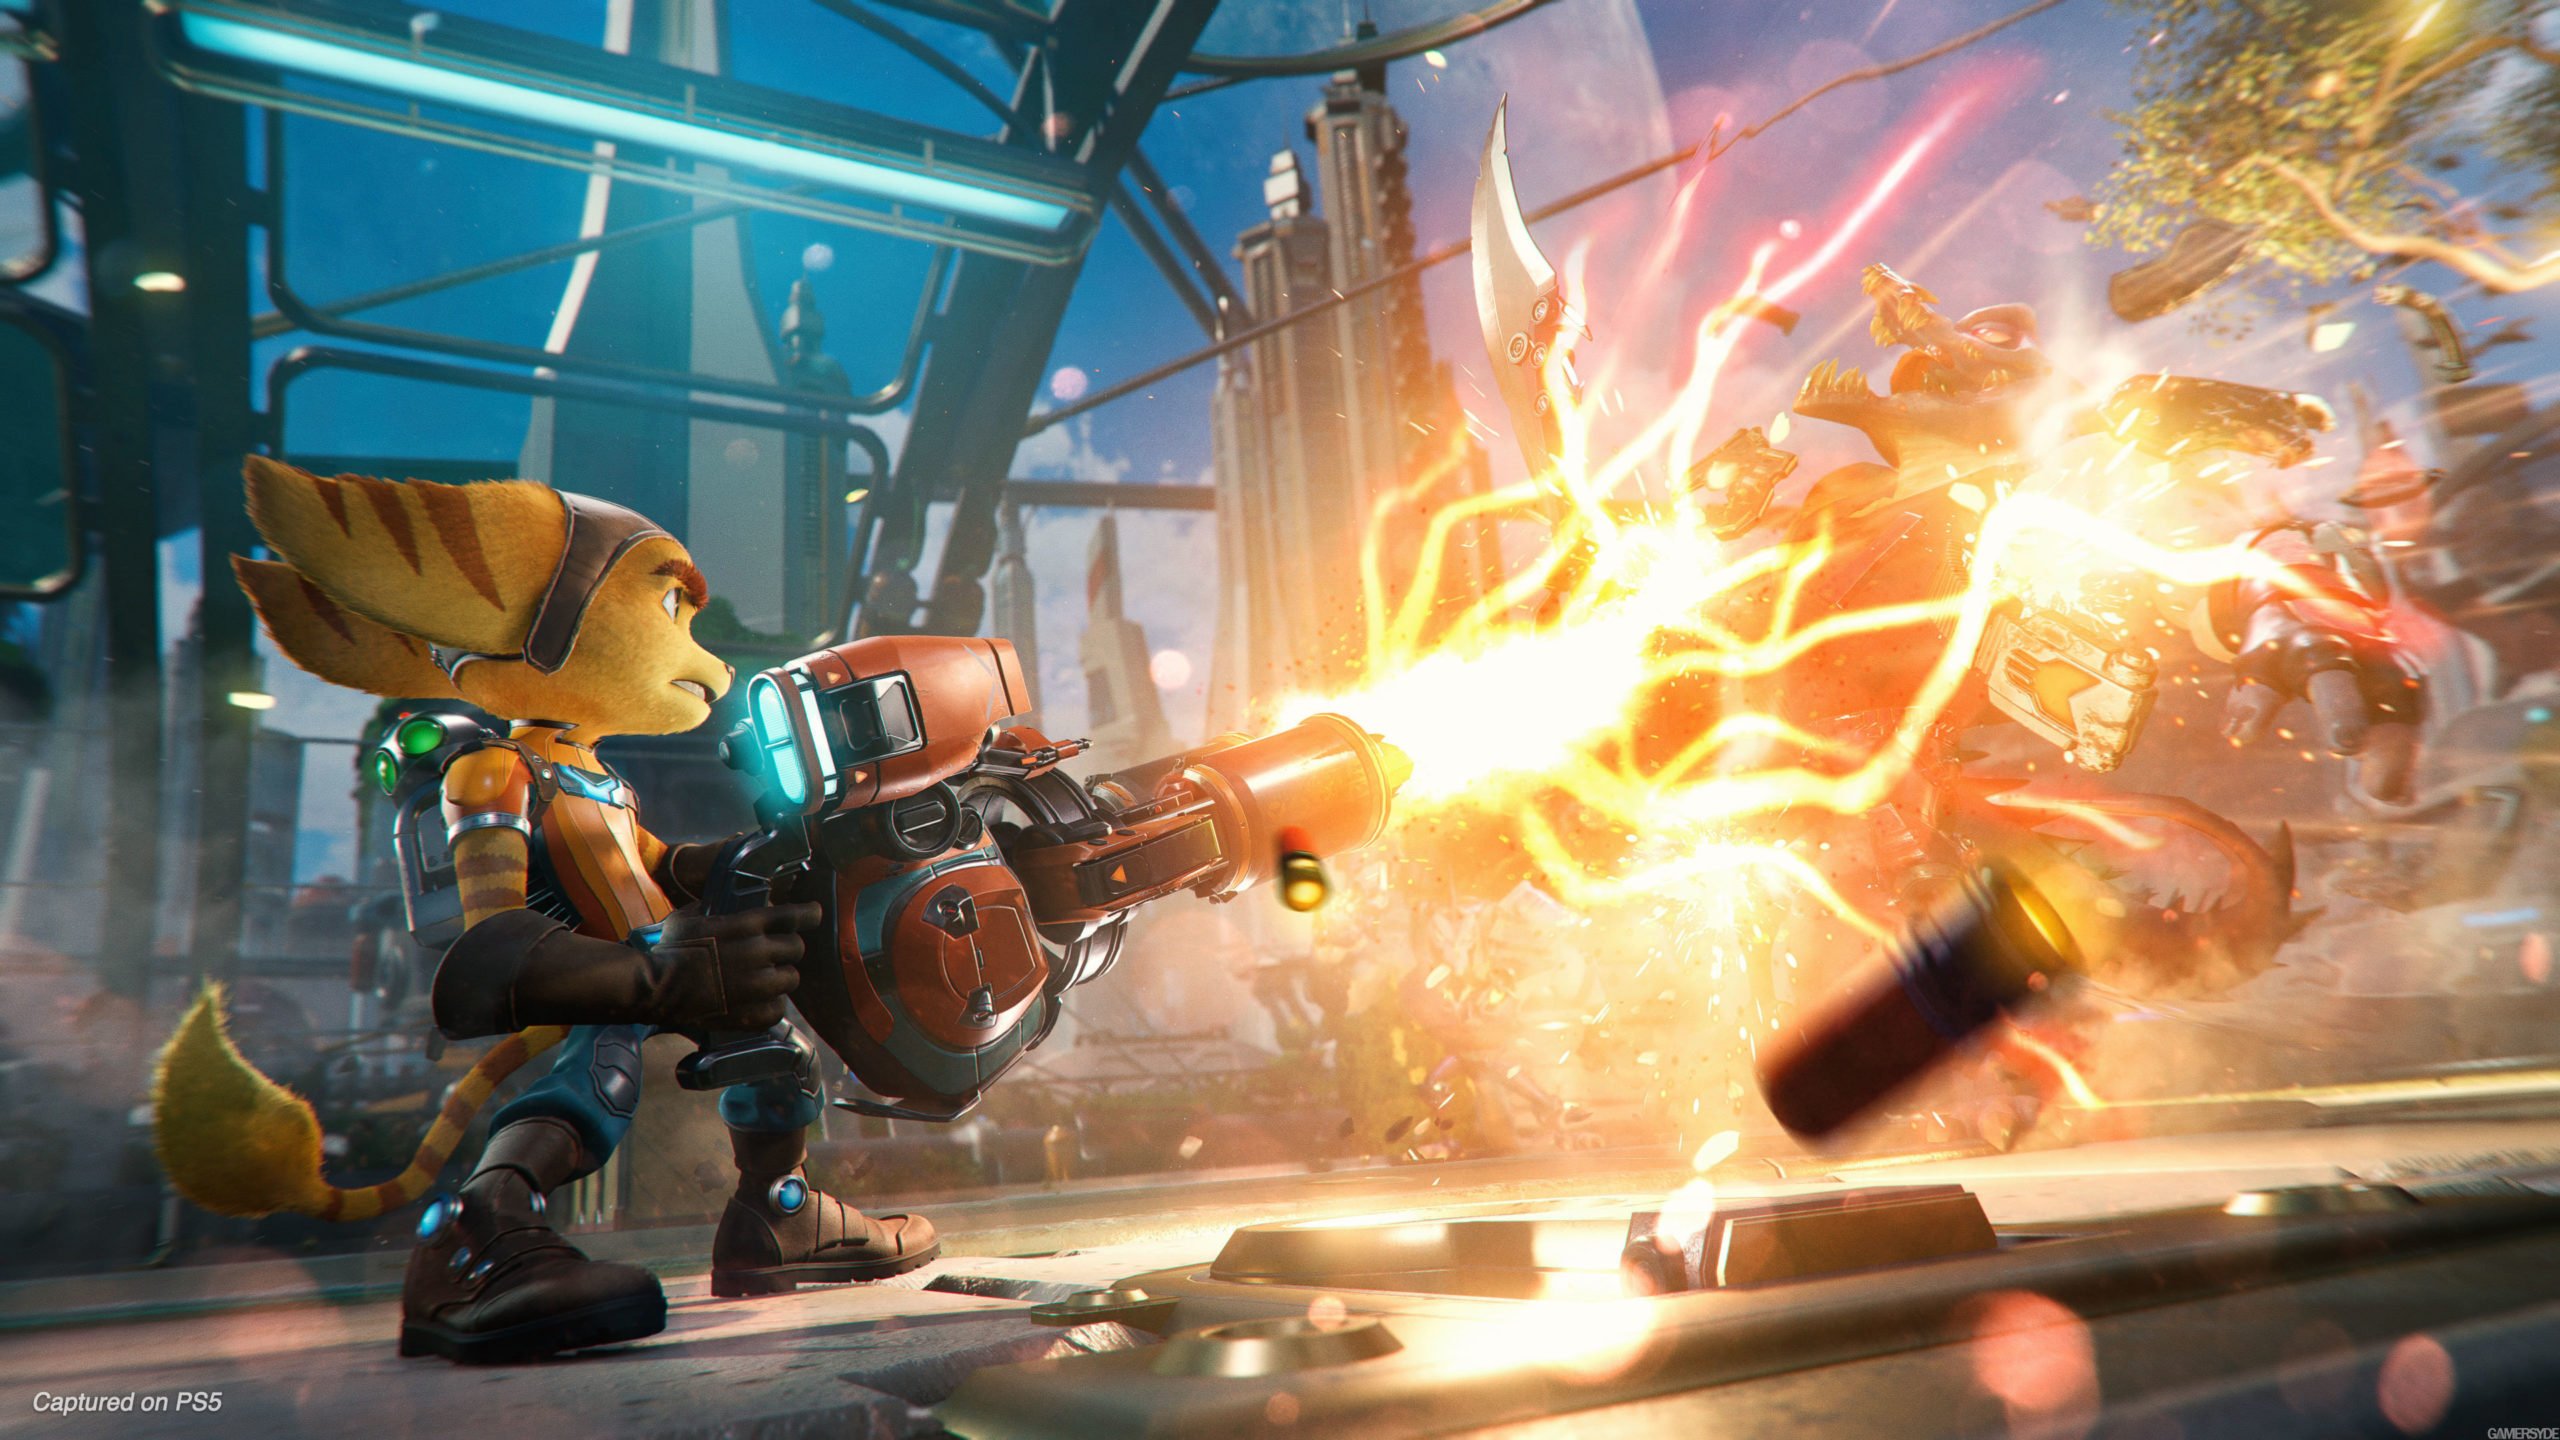 PlayStation Plus Game Catalog lineup for May: Ratchet & Clank